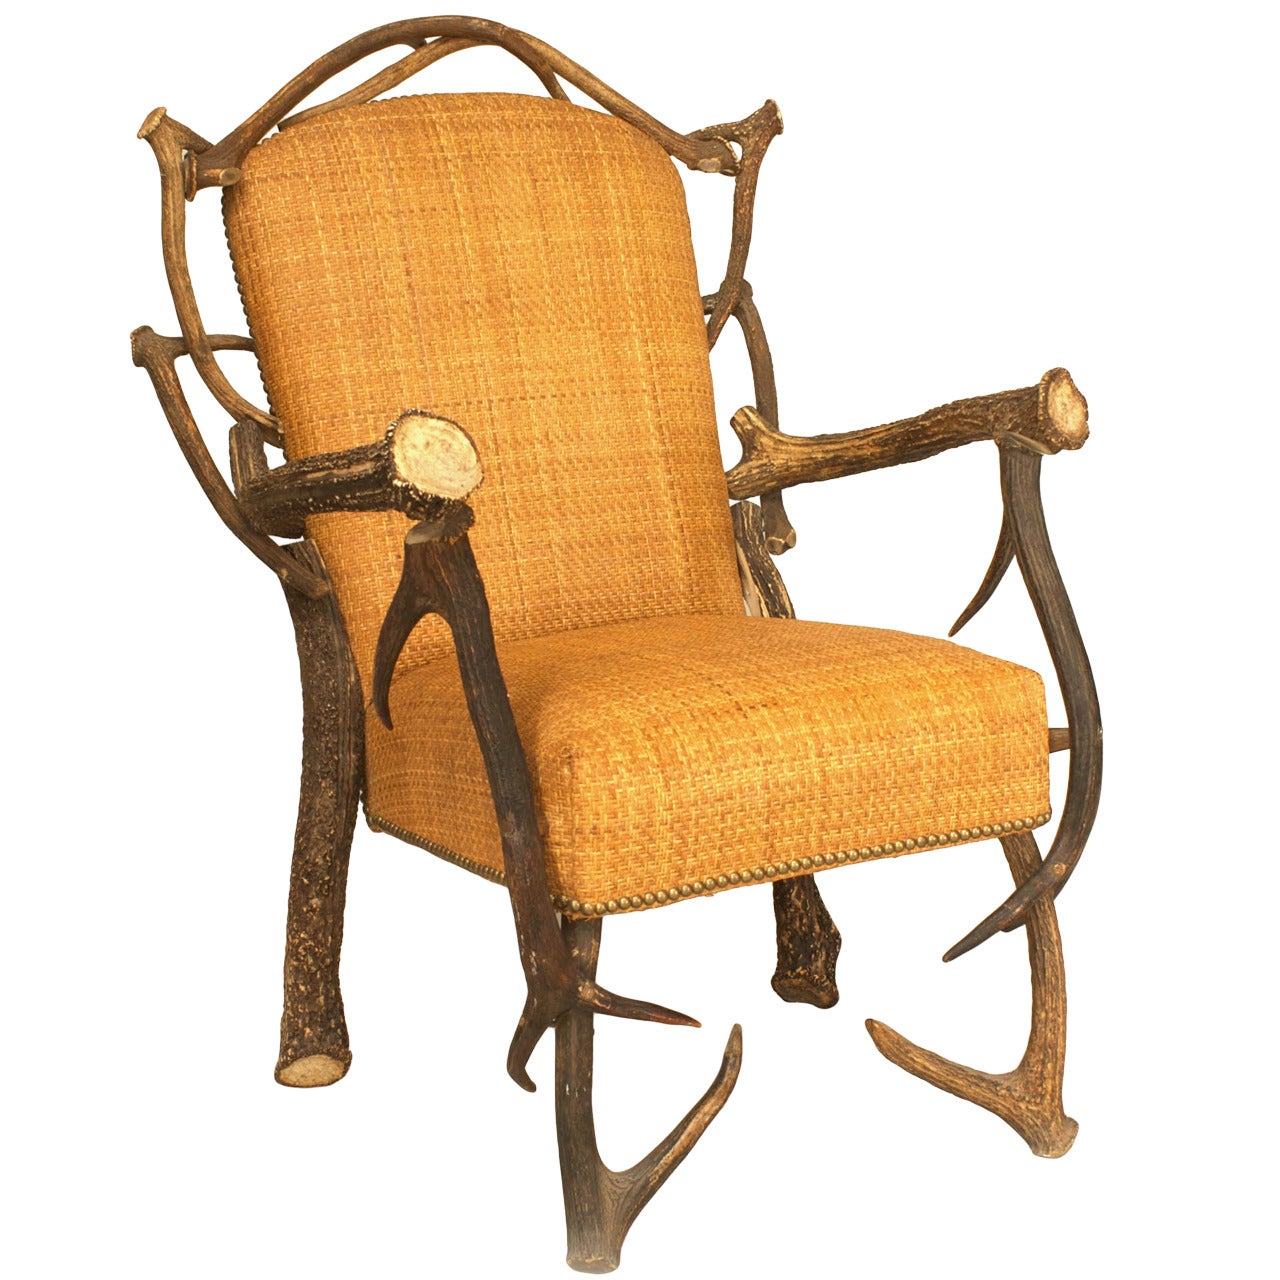 Early 20th c. Continental Stag Horn Chair